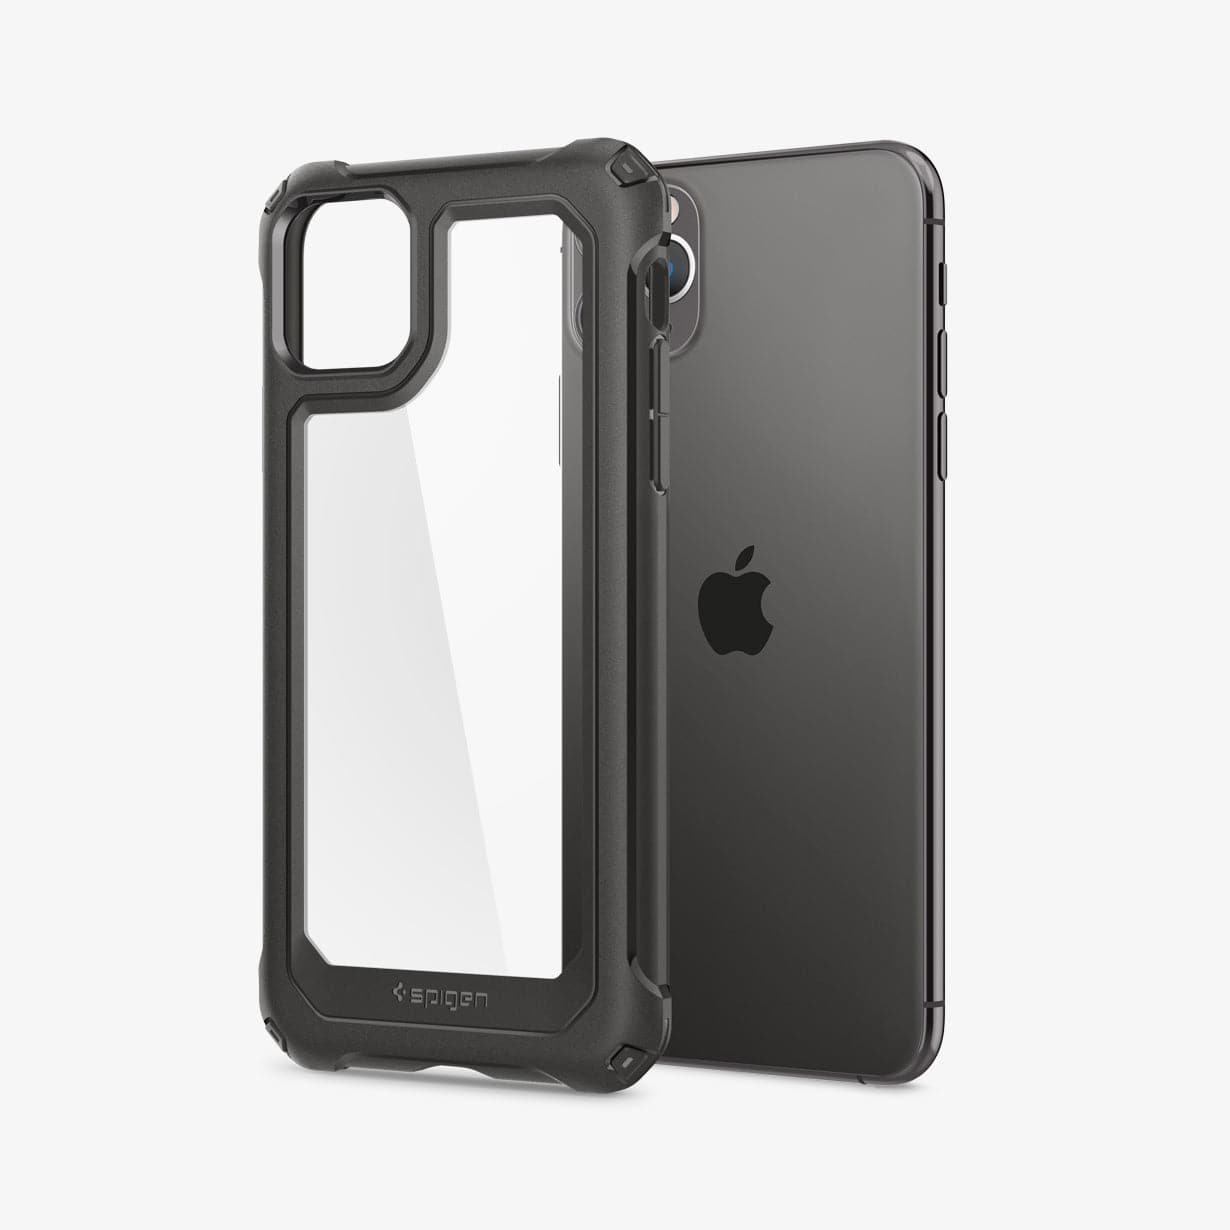 075CS27052 - iPhone 11 Pro Max Case Gauntlet in gunmetal showing the back of device with case hovering away